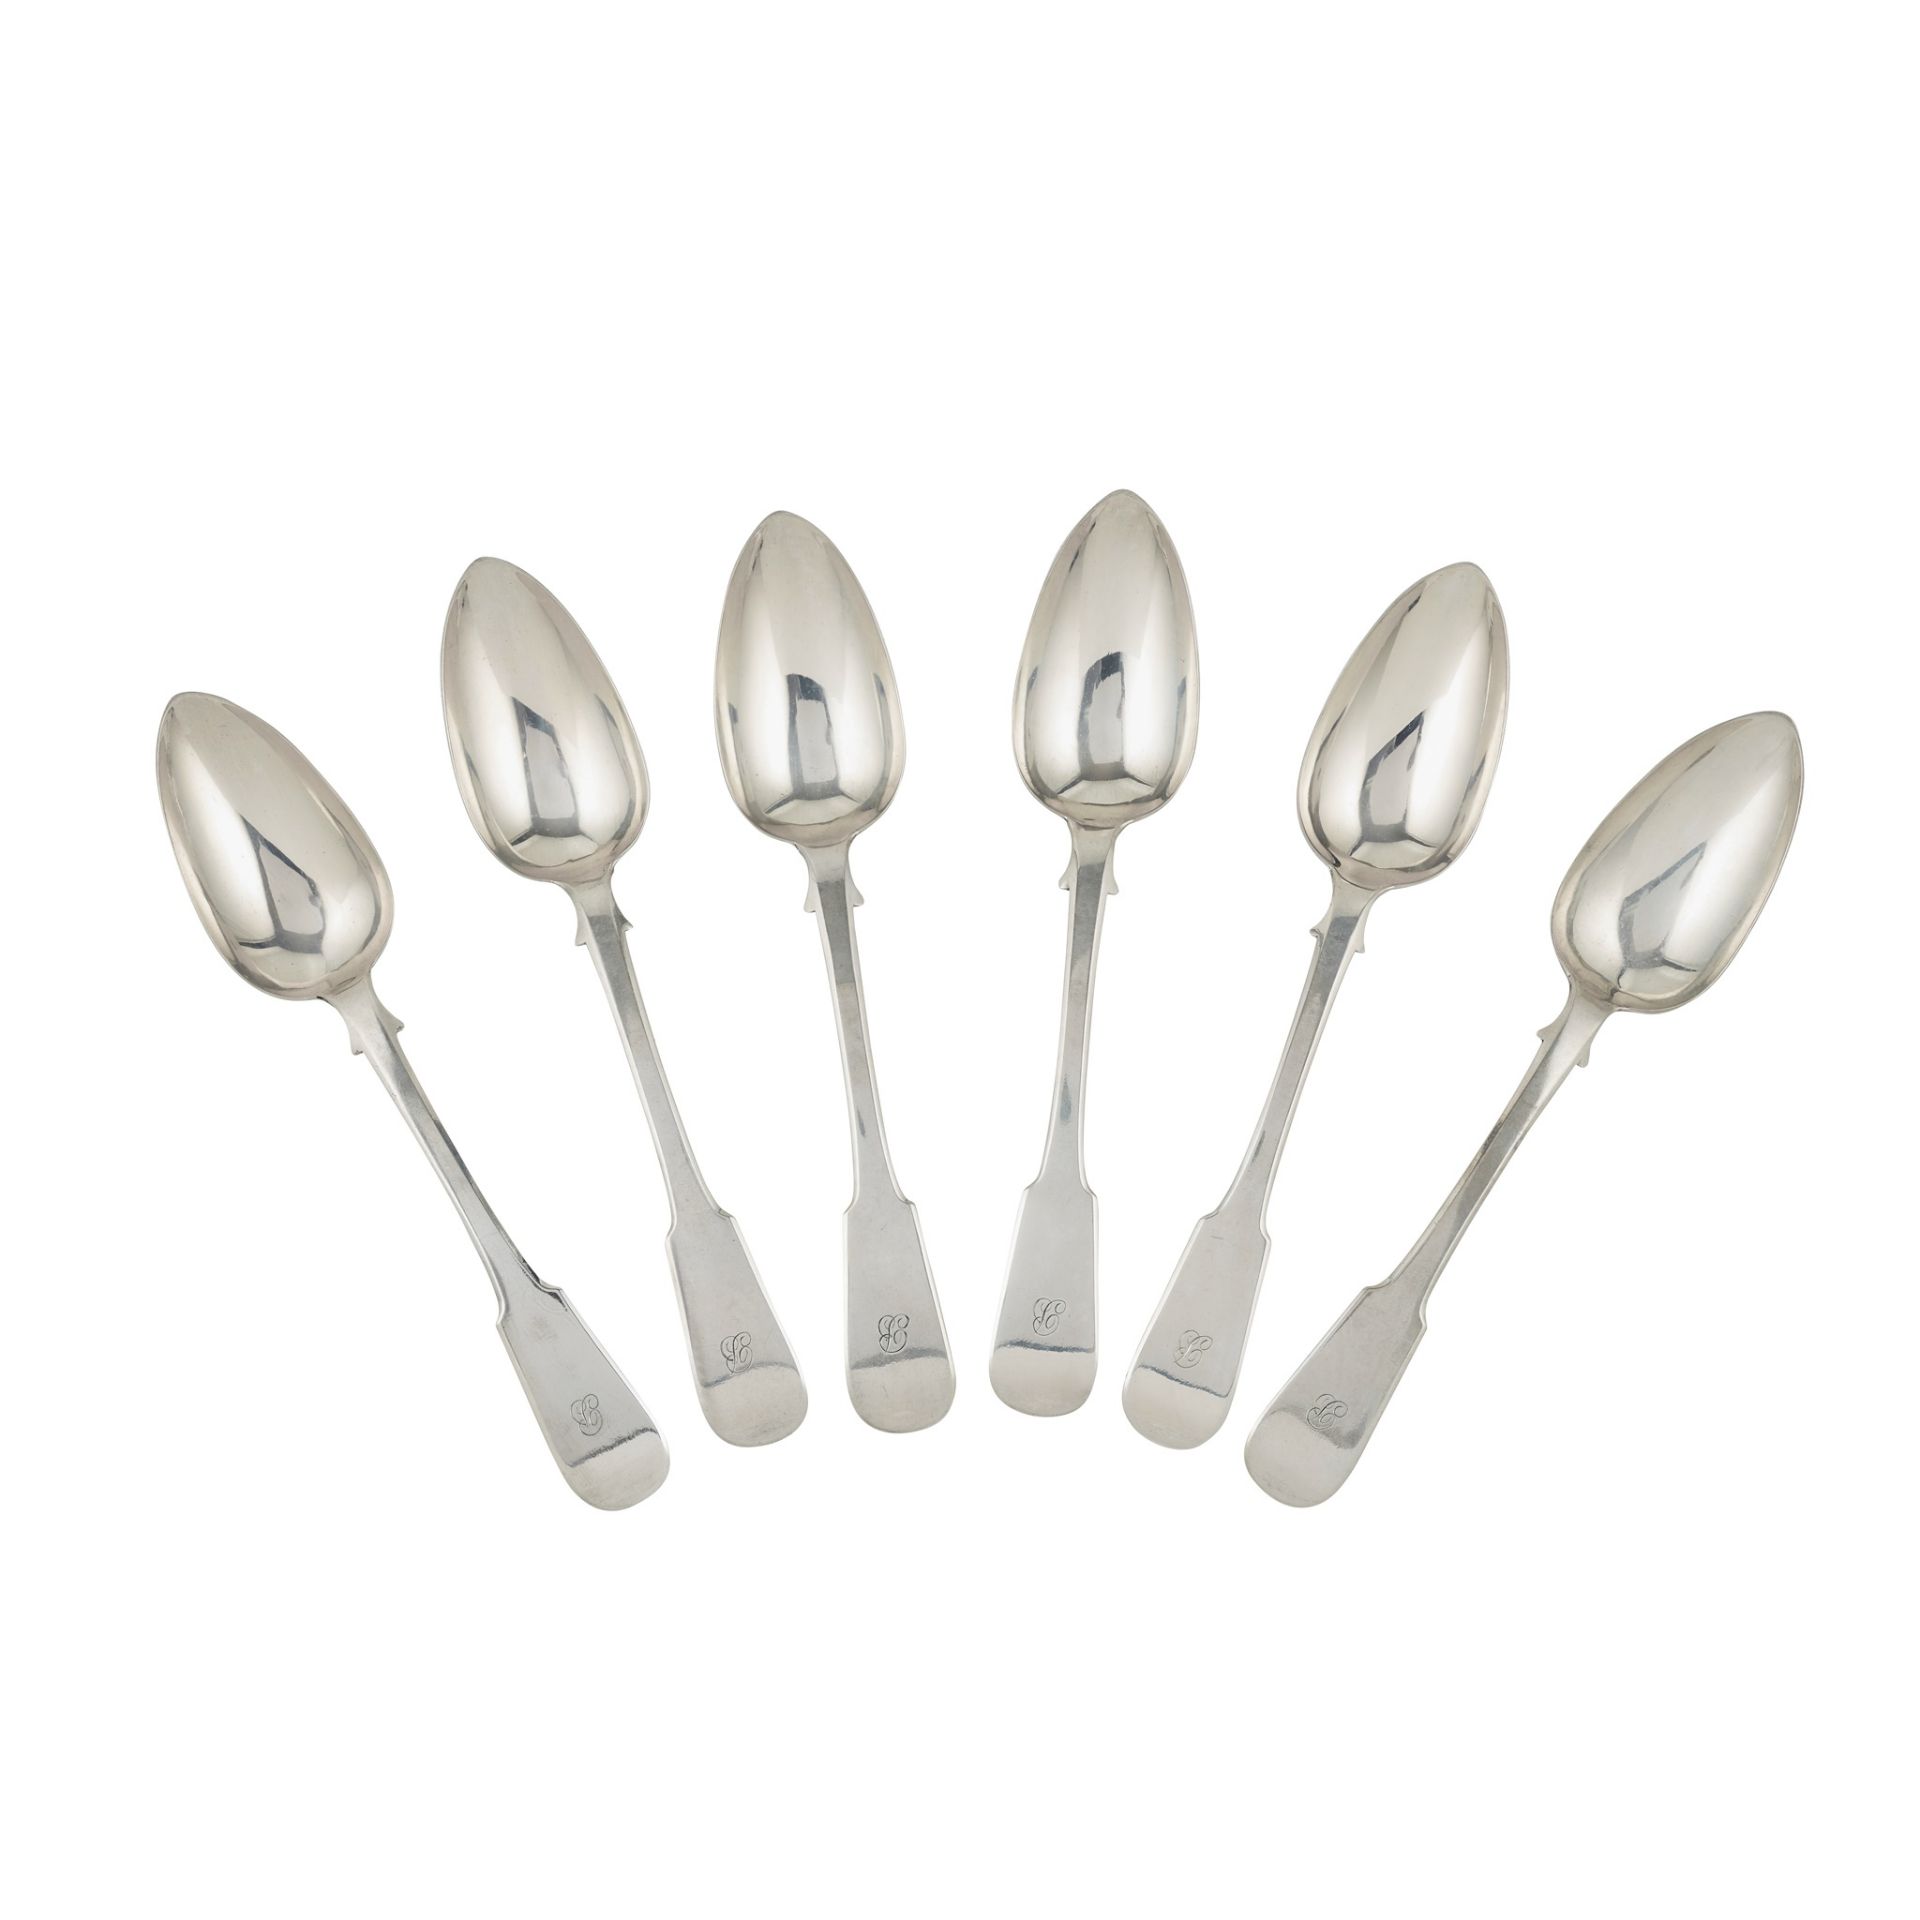 Dumfries - A set of six Scottish provincial tablespoons